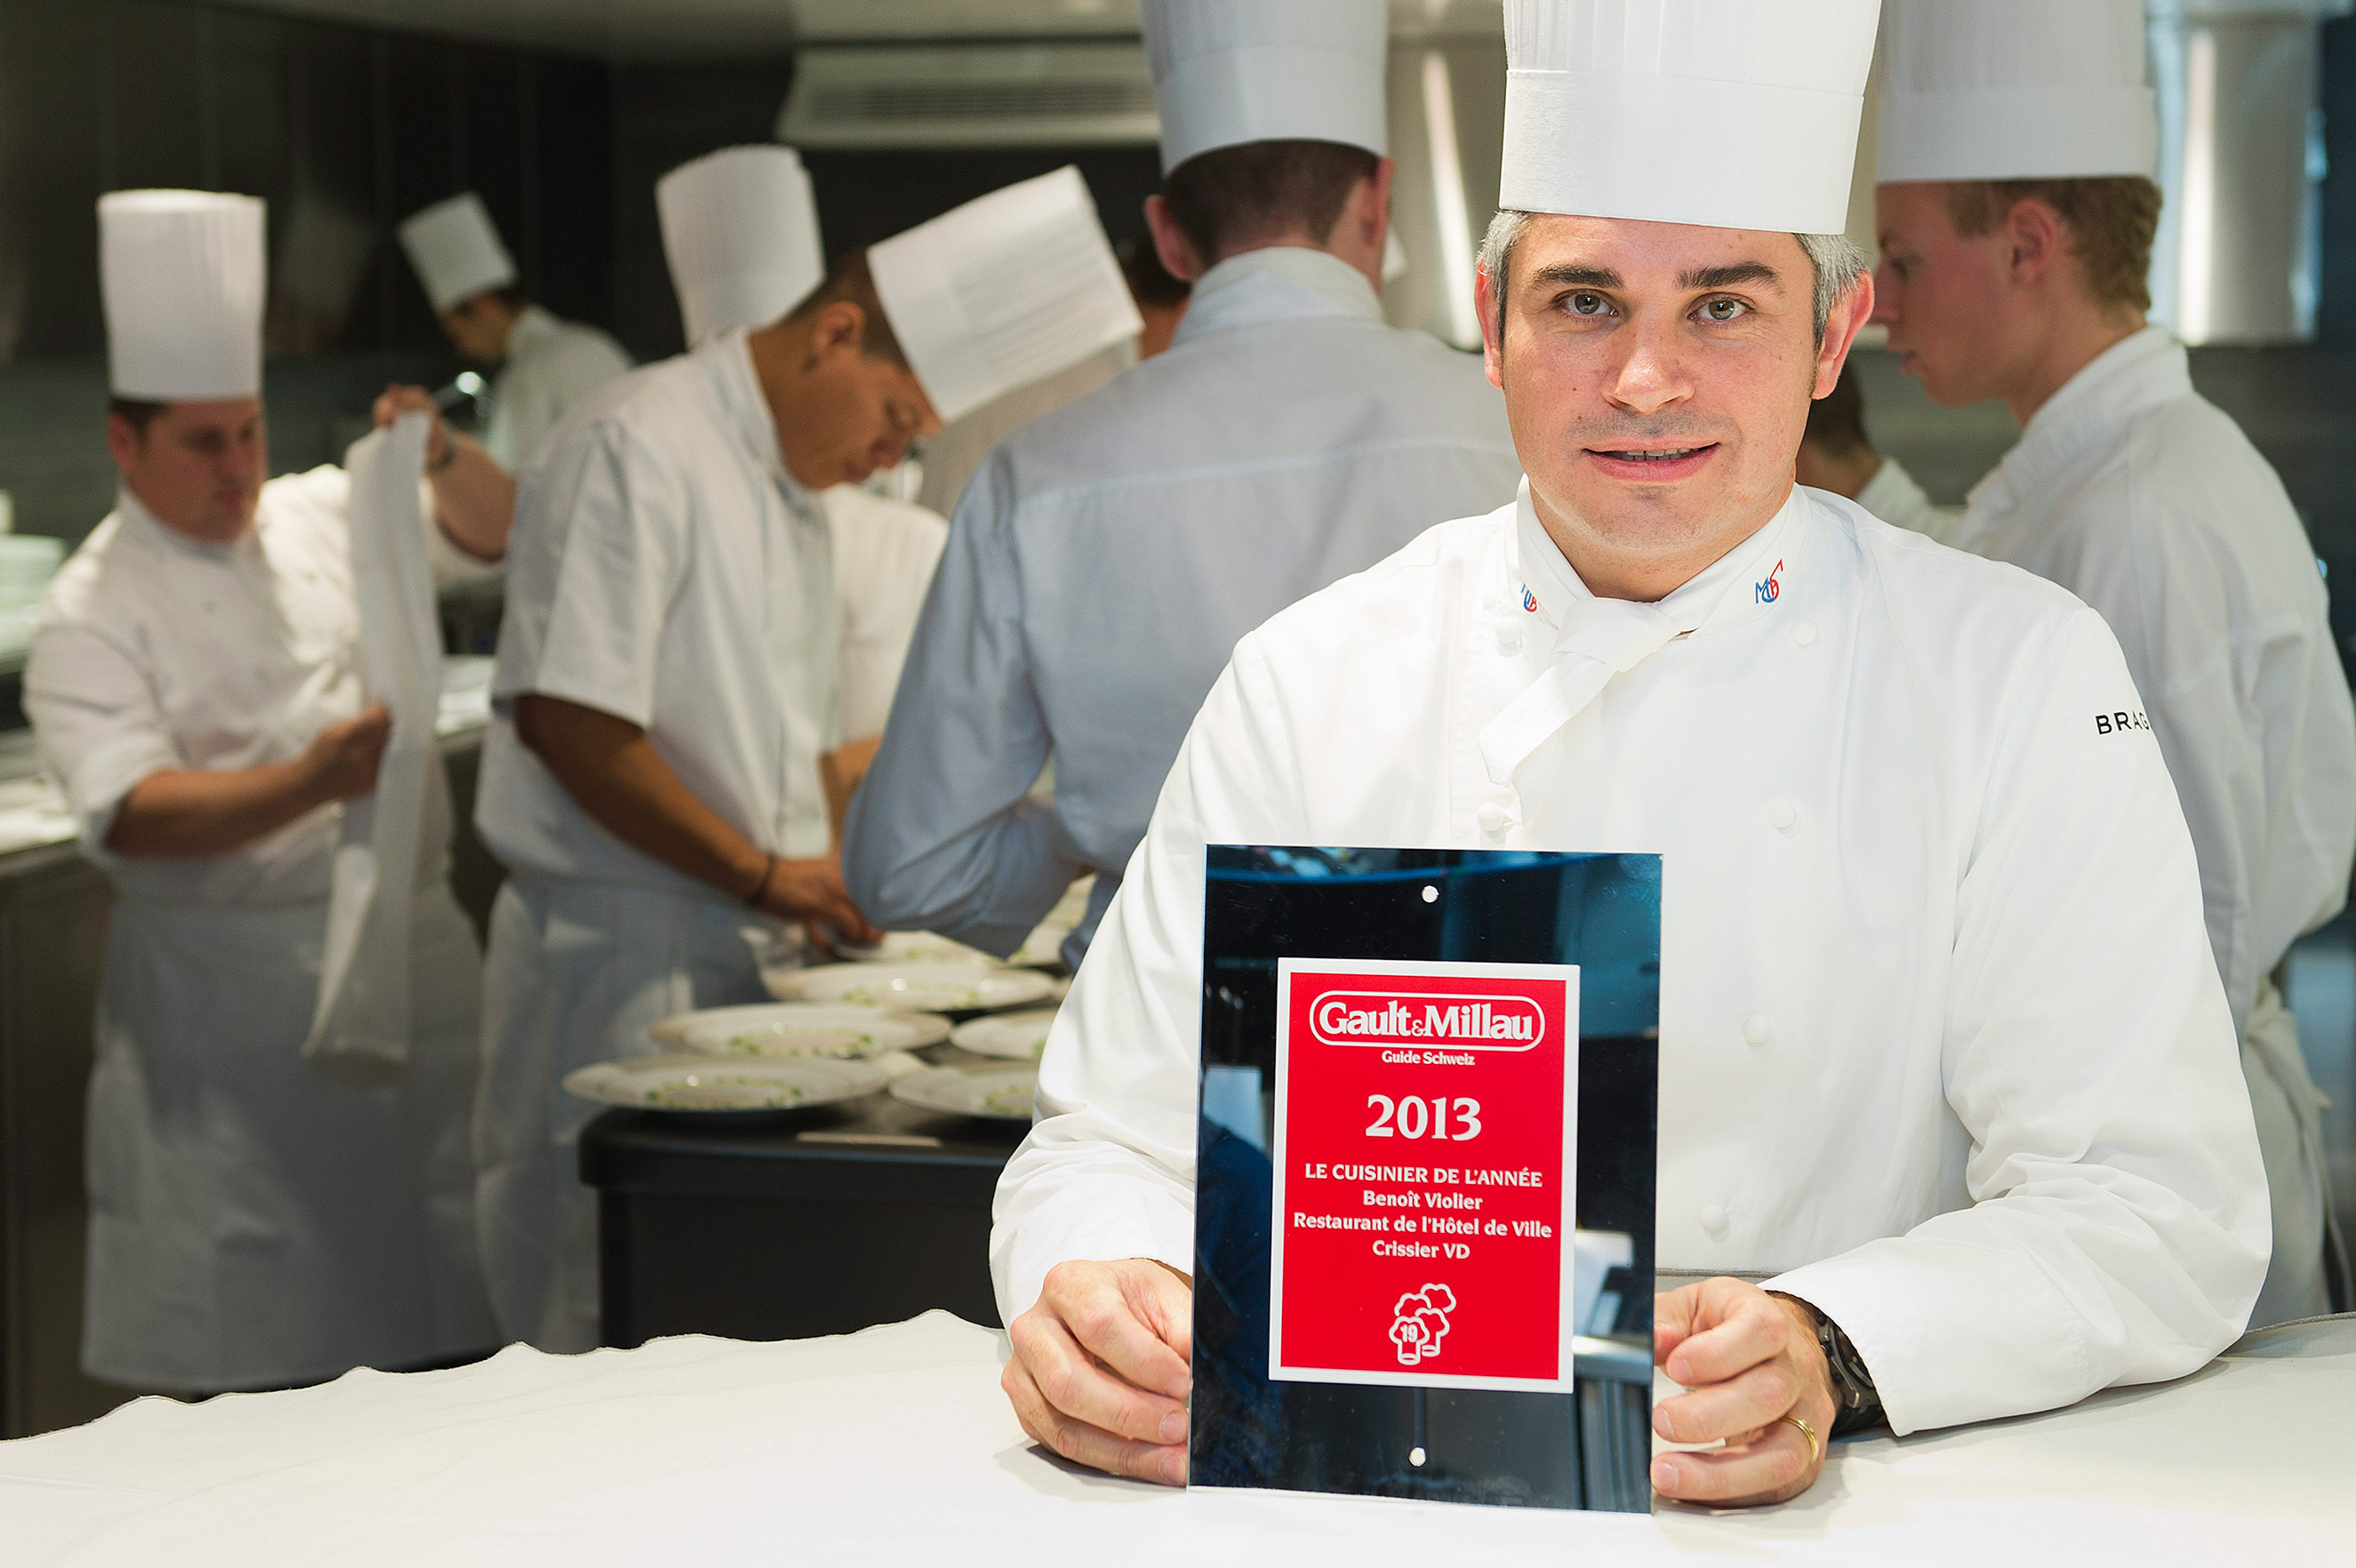 Benoit Violier poses with the certificate as Chef of the Year in his kitchen in the Hotel de Ville in Crissier, Switzerland, Oct. 8, 2012. (Jean-Christophe Bott—Keystone/AP)